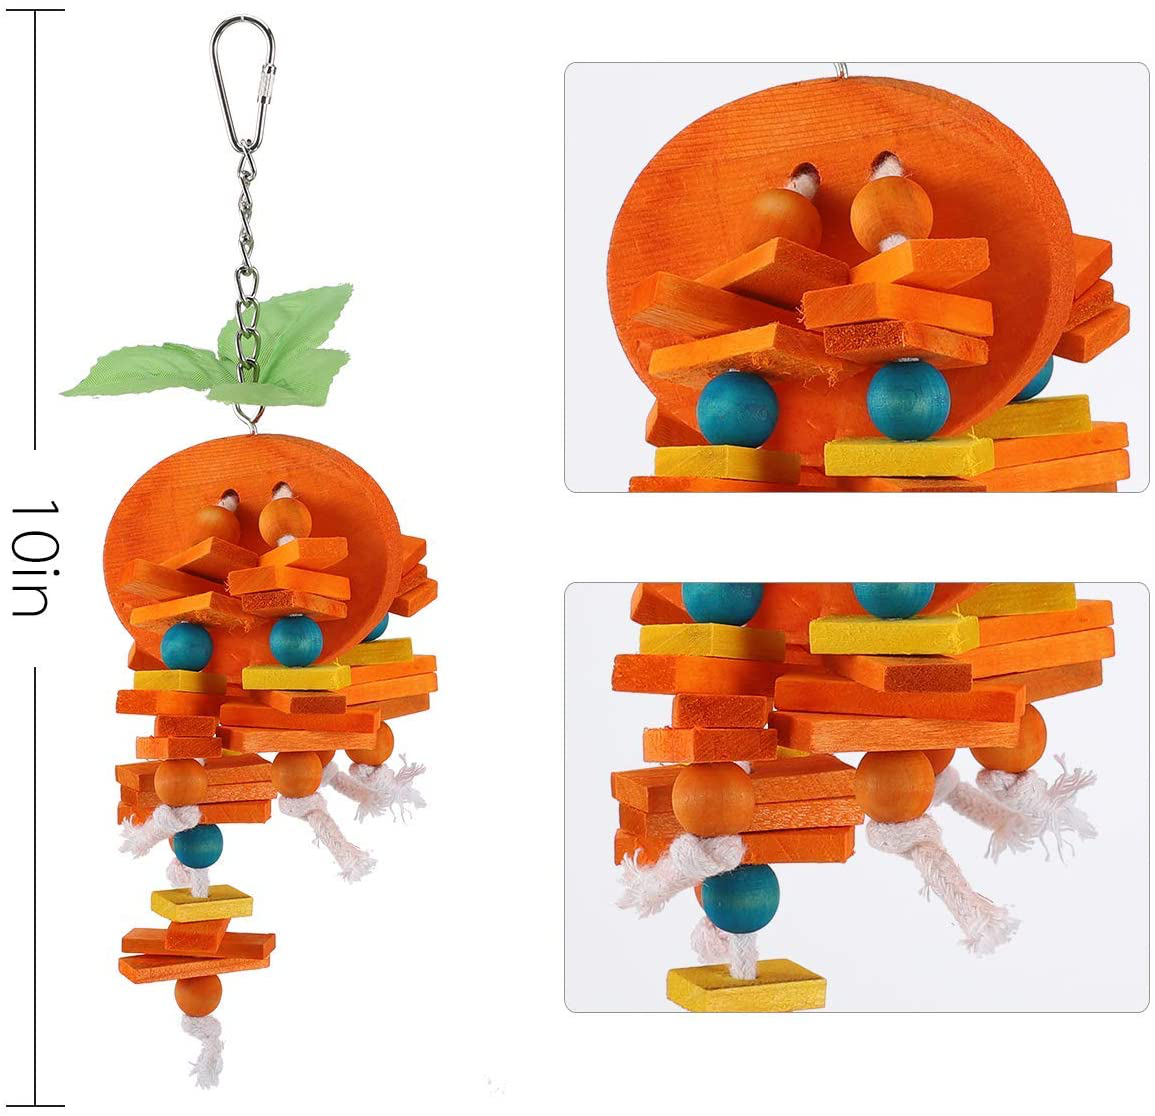 Hamiledyi Natural Wood Block Bird Cage Toys Parrot Chewing Toy, Orange & Apple & Banana & Grapes Shaped Hanging Foraging Toy for Small&Medium Birds Parakeets Cockatiels Conures Budgie Canary,4Pcs